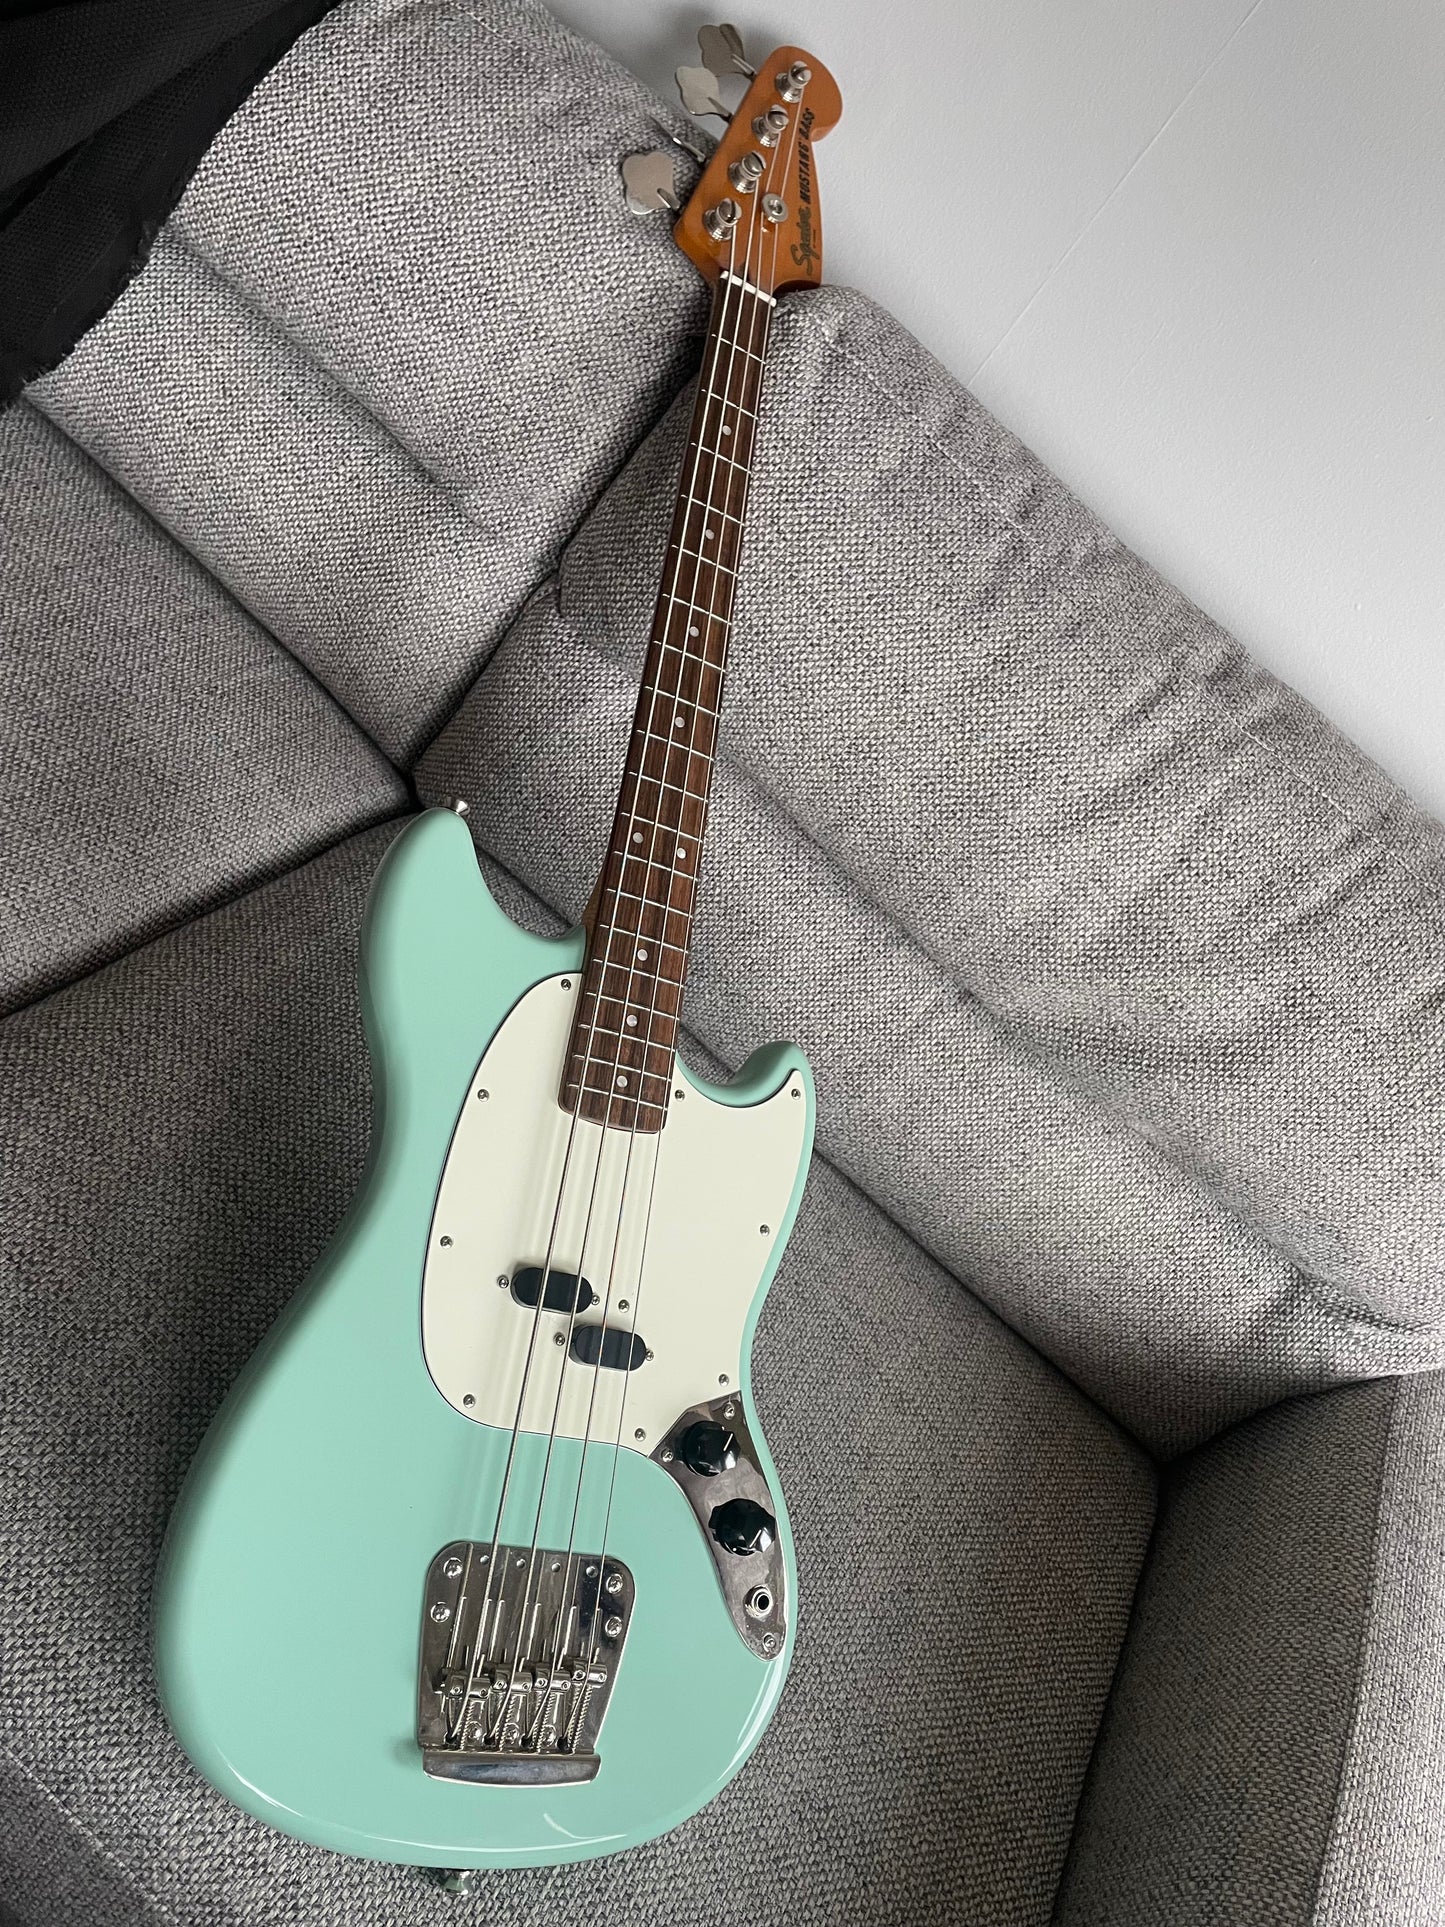 Squier by Fender Classic Vibe 60's Mustang Bass Guitar